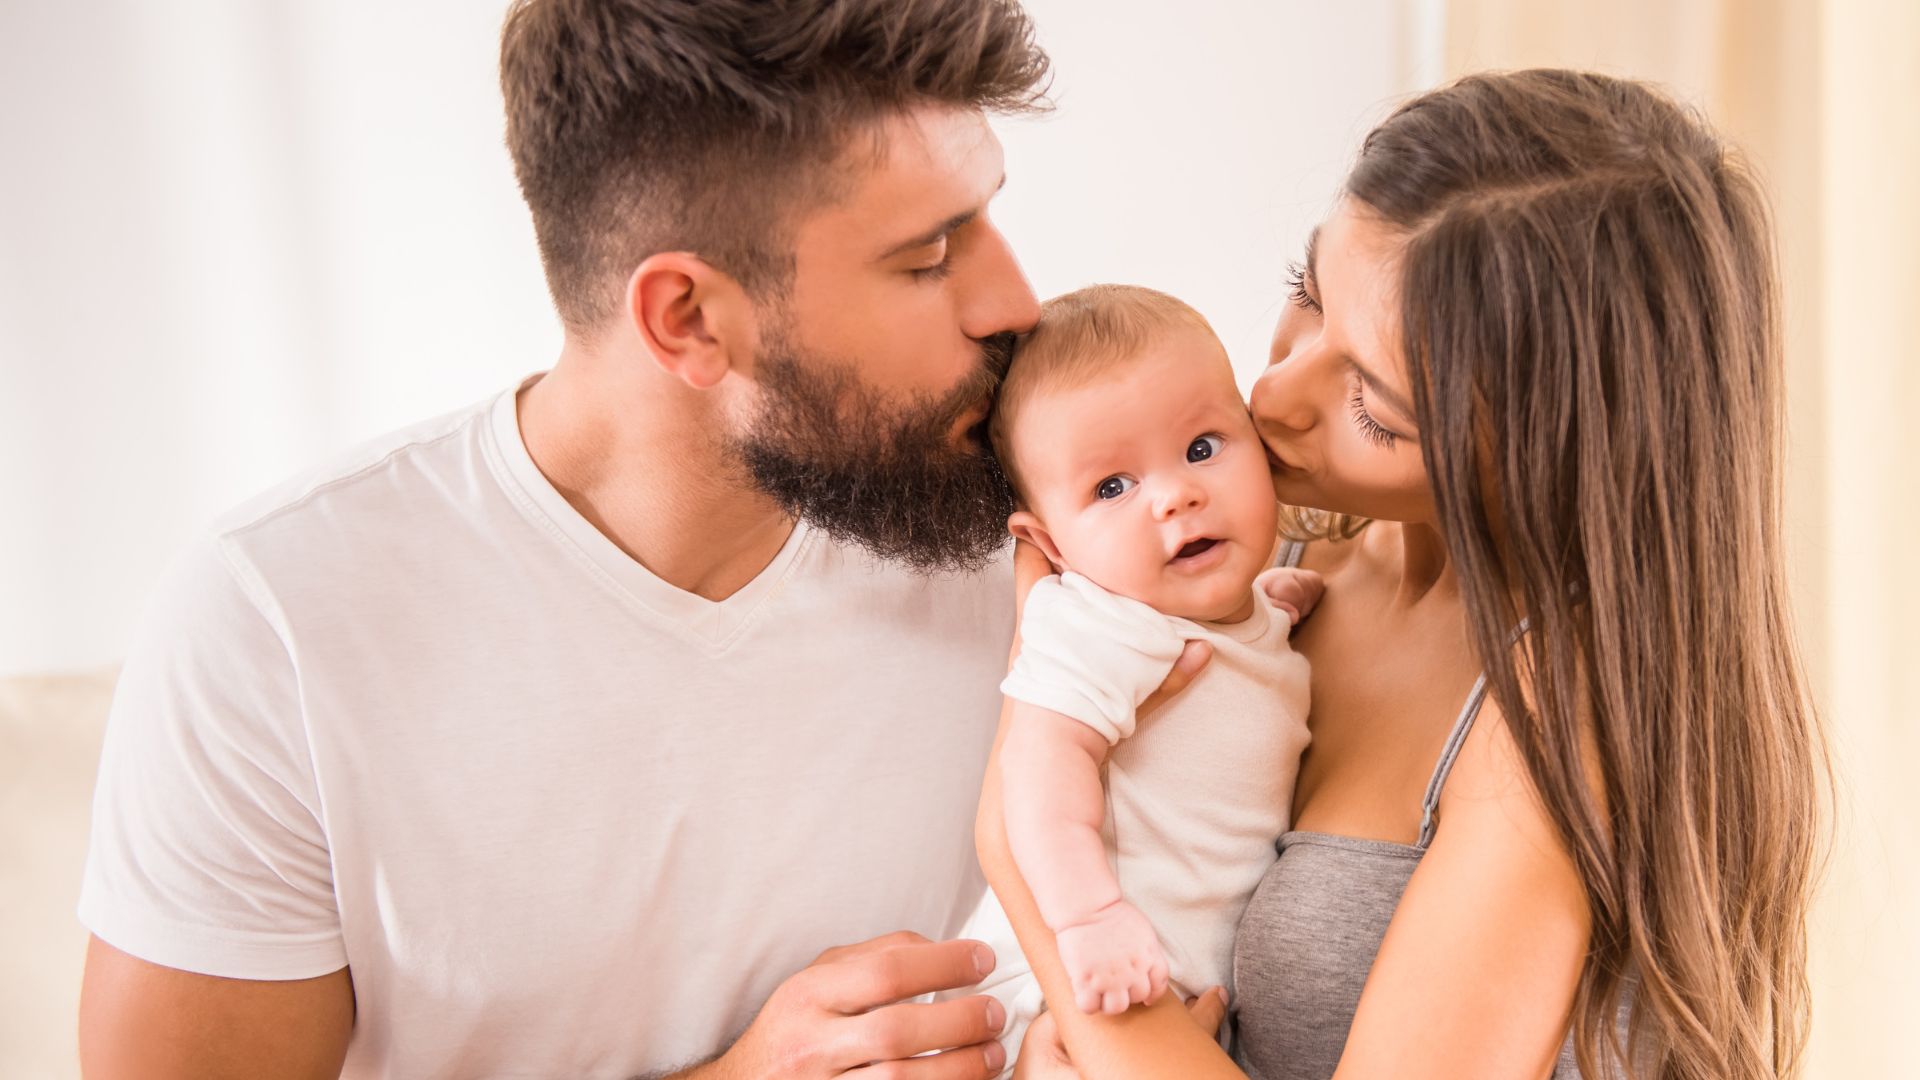 How To Bond And Connect With Your Baby In The Best Way